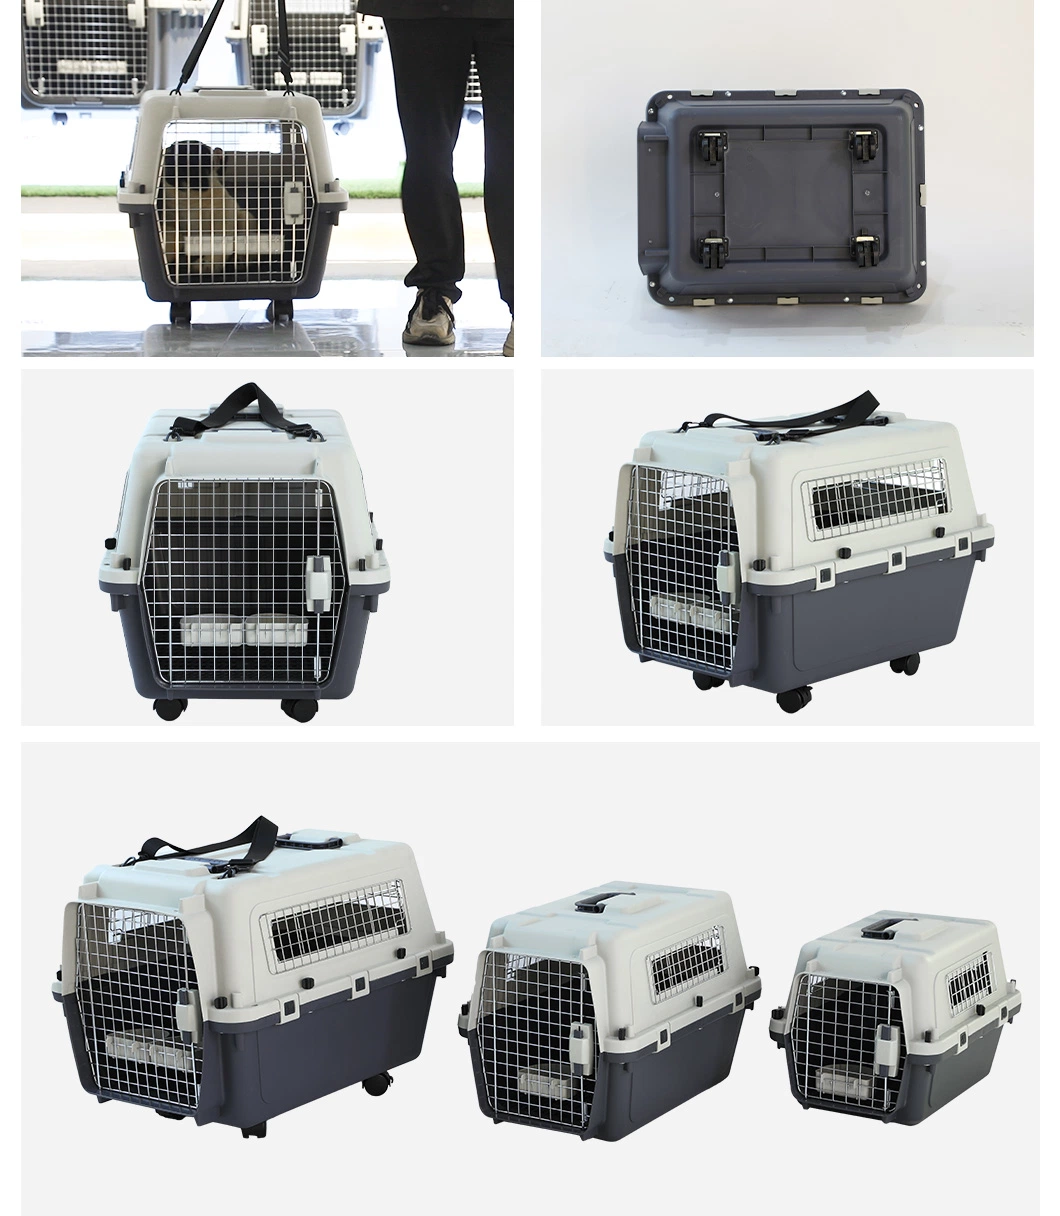 Air Approved Pet Carrier Products Outdoor Iron Door Cat Dog Kennel Luxury Puppy Rabbit Carrier Airline Transport Box Travel Dog Cage with Wheels